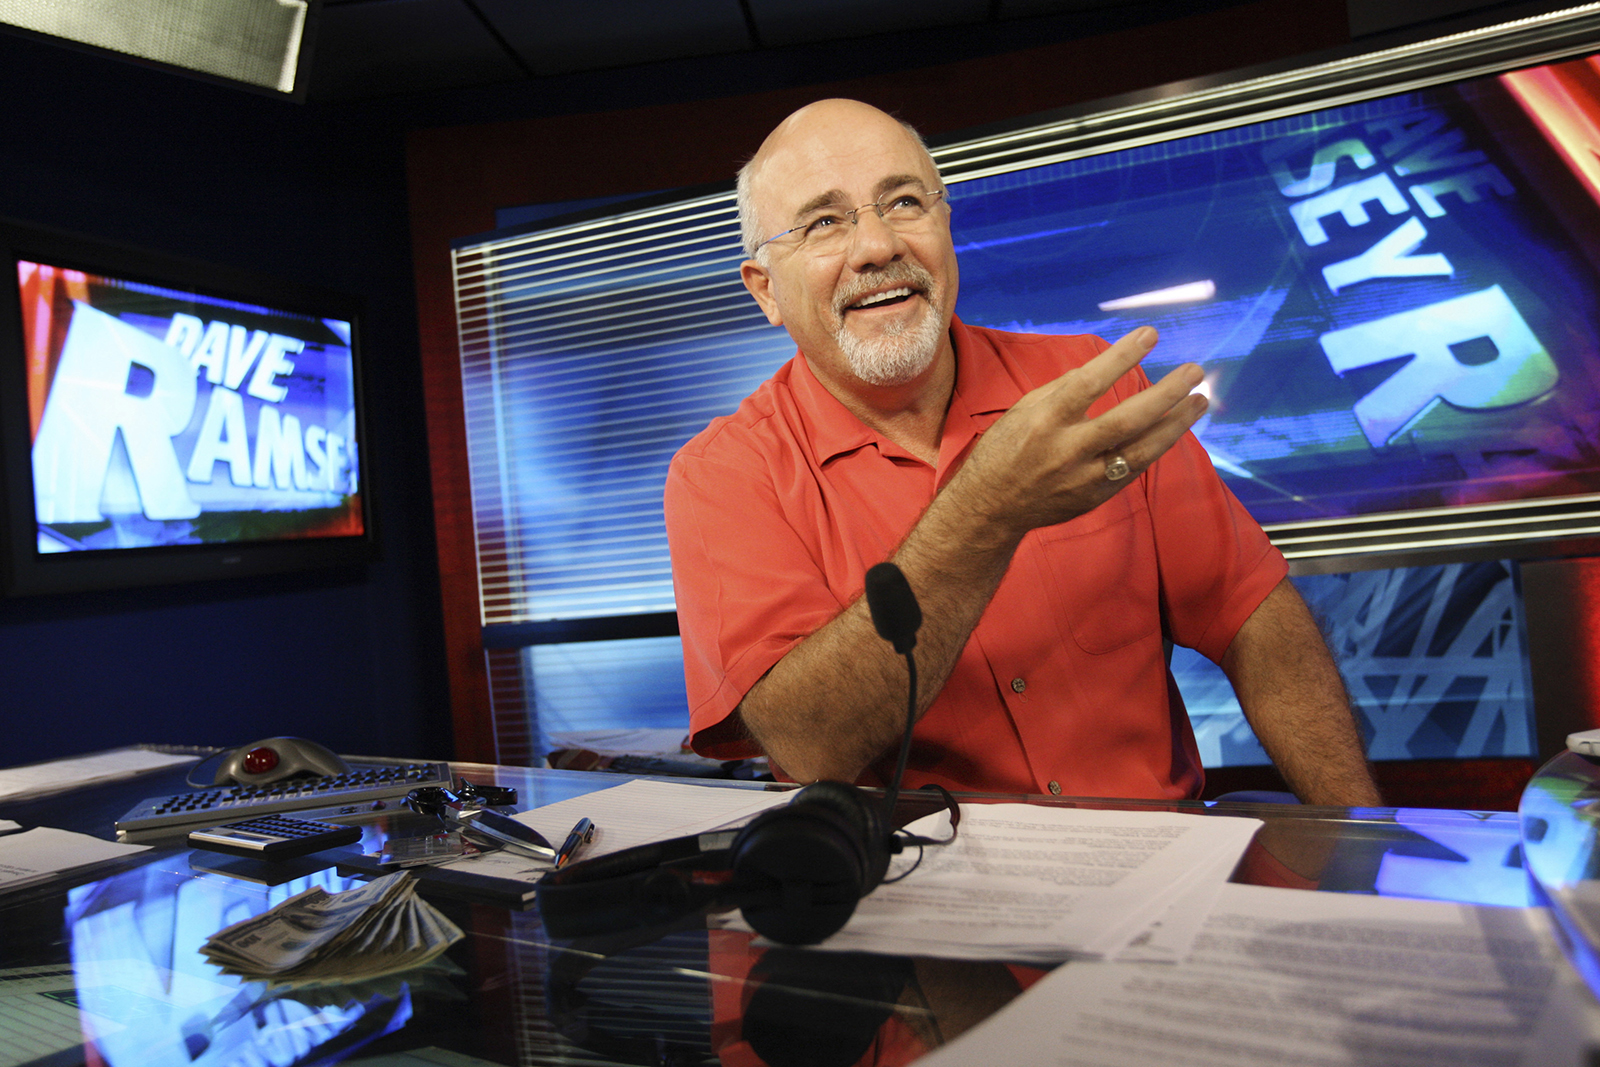 In this July 29, 2009, file photo, financial guru Dave Ramsey sits in his broadcasting studio in Brentwood, Tennessee. (AP Photo/Josh Anderson, File)